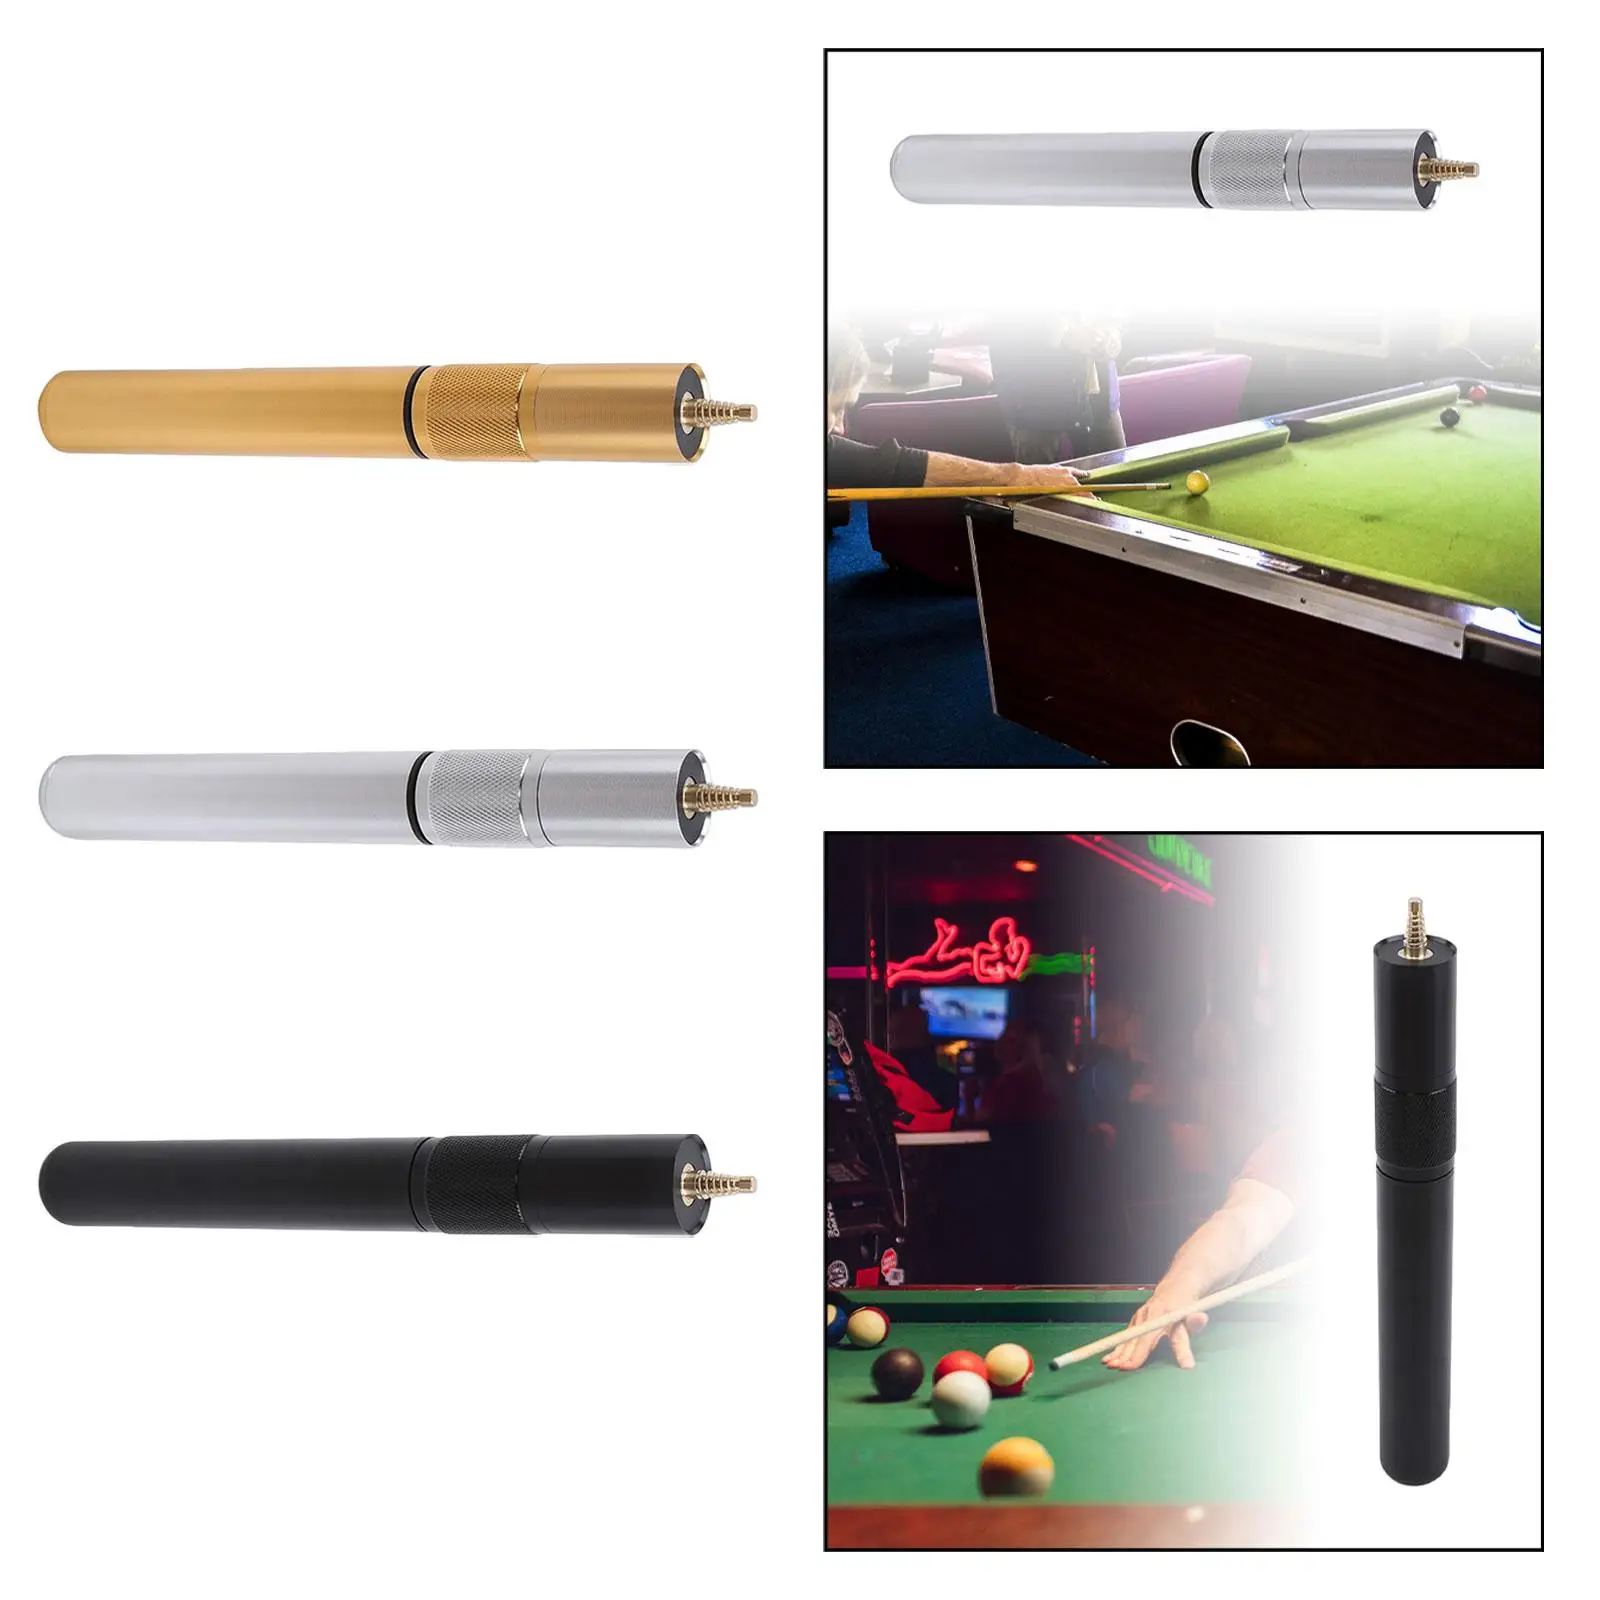 Telescopic Pool Cue Extender Pool Cue Extension Billiard Snooker Cue Extension Cue Lengthener for Athlete Beginners Accessory